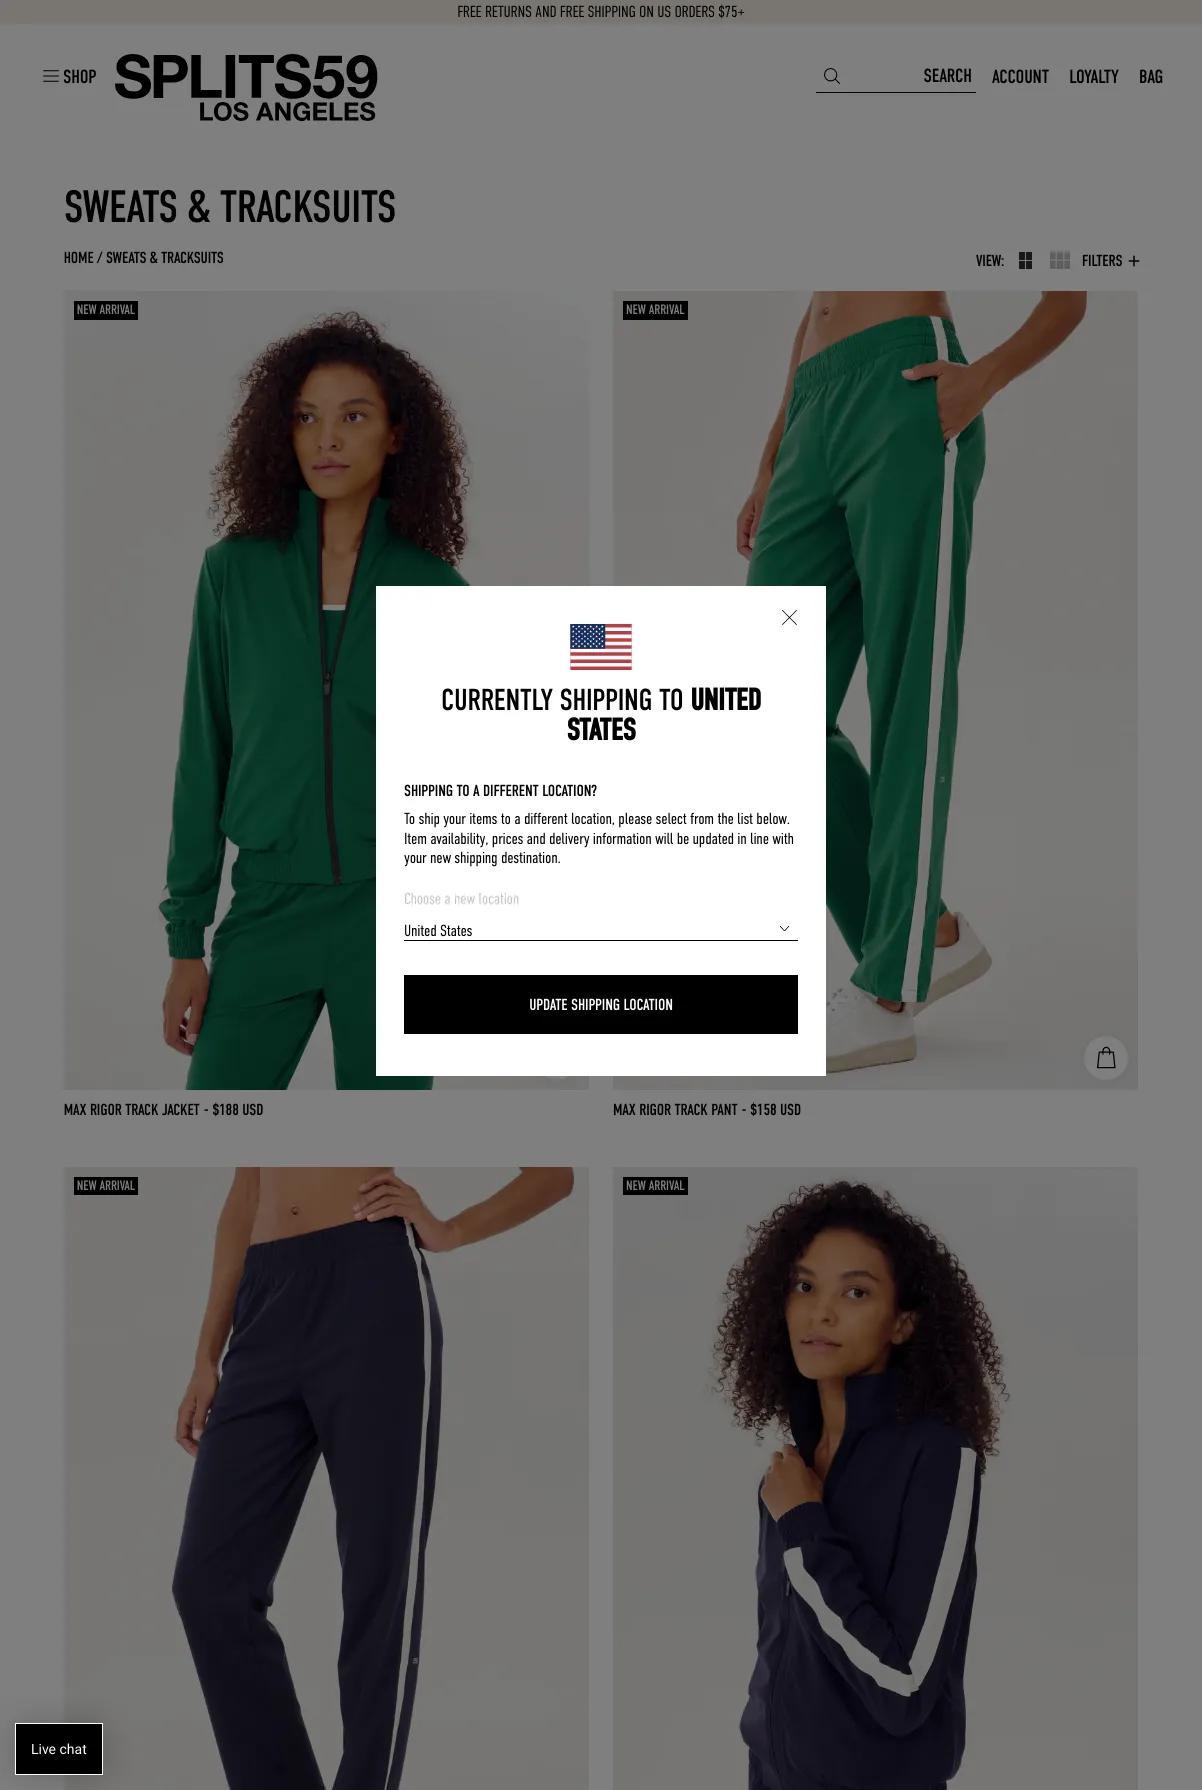 Screenshot 2 of Splits59 (Example Shopify Clothing Website)